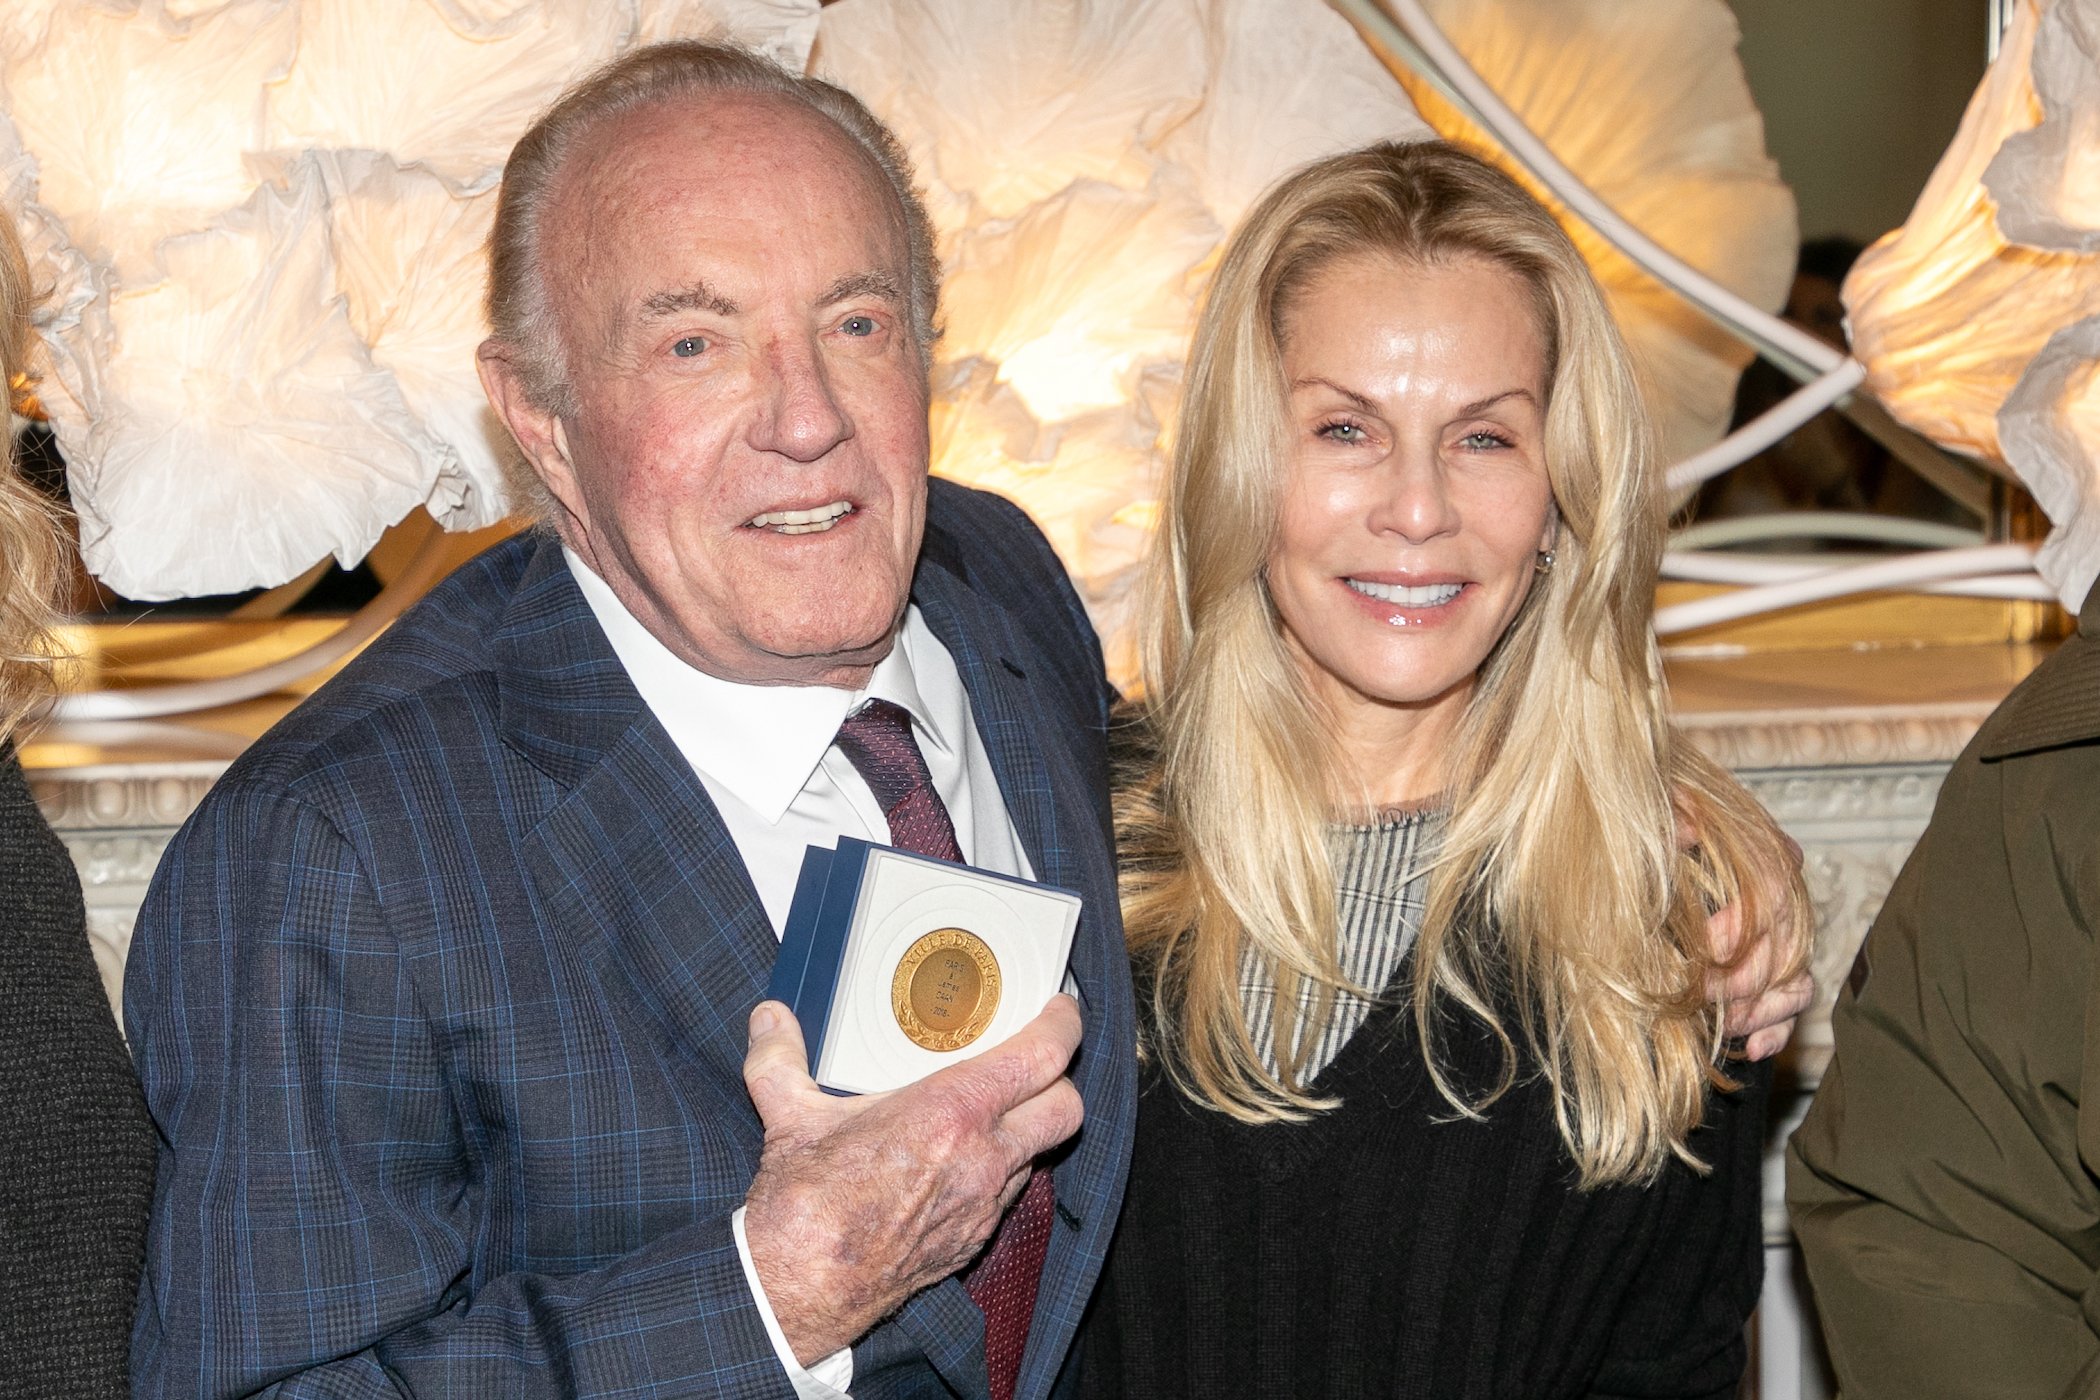 James Caan with his arm around ex-wife Linda Stokes